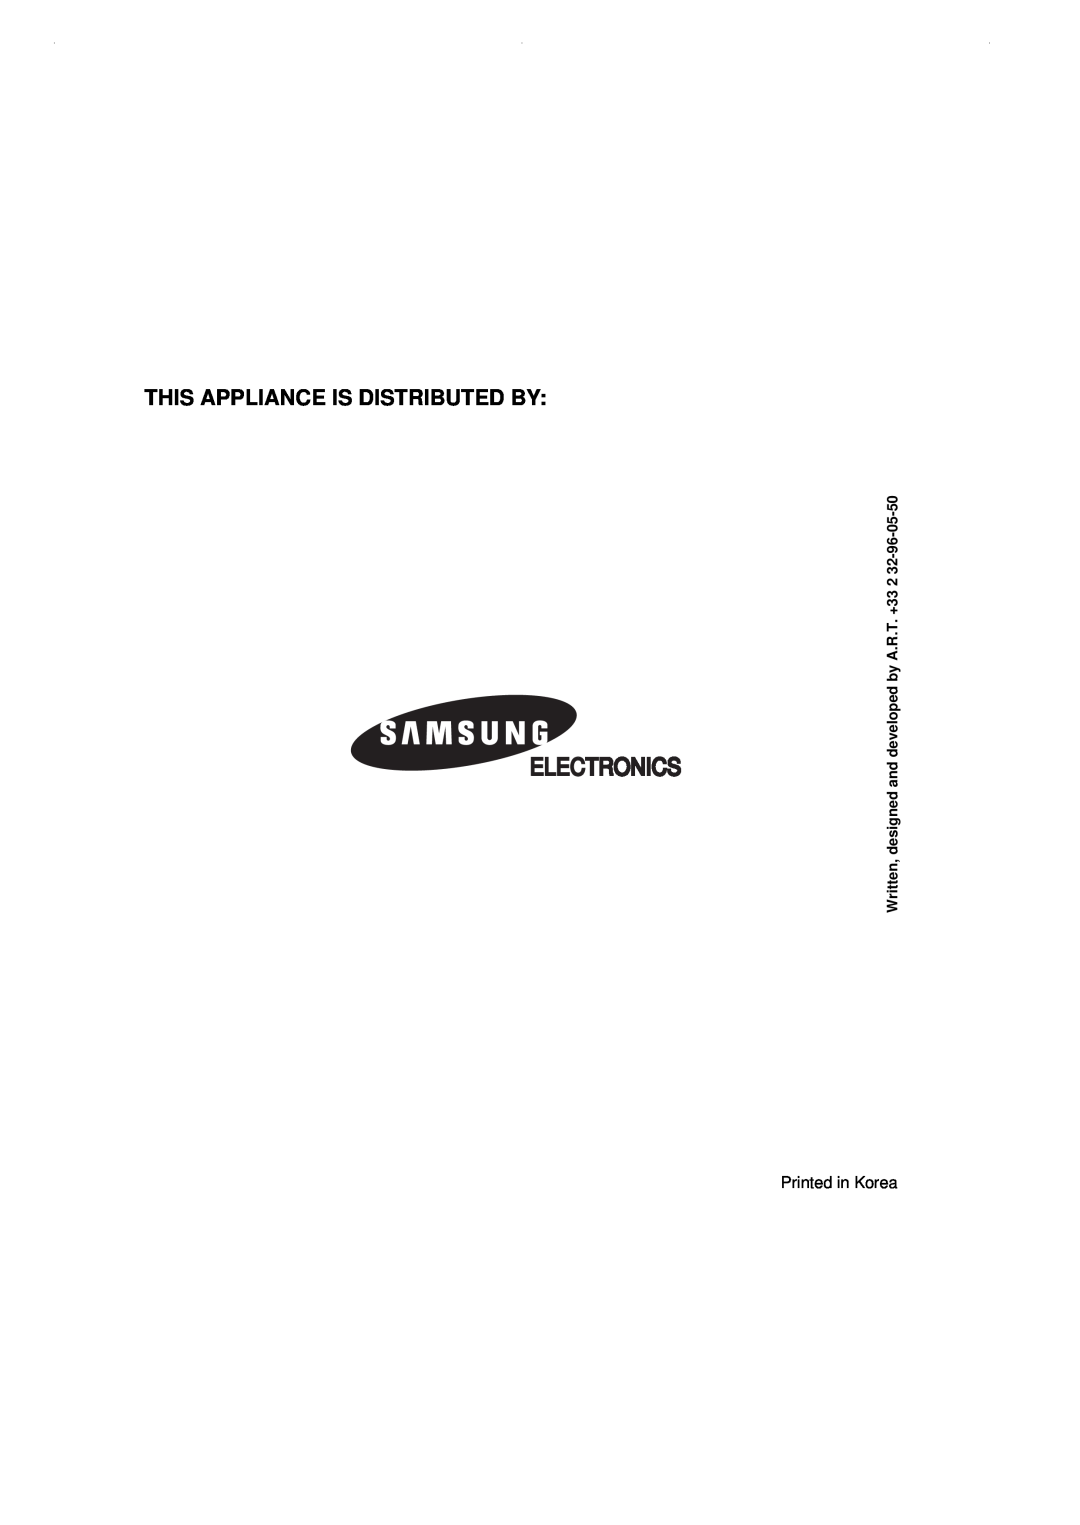 Samsung SR-38NMB, SR-29NXA Electronics, This Appliance Is Distributed By, Written, designed and developed by A.R.T. +33 2 